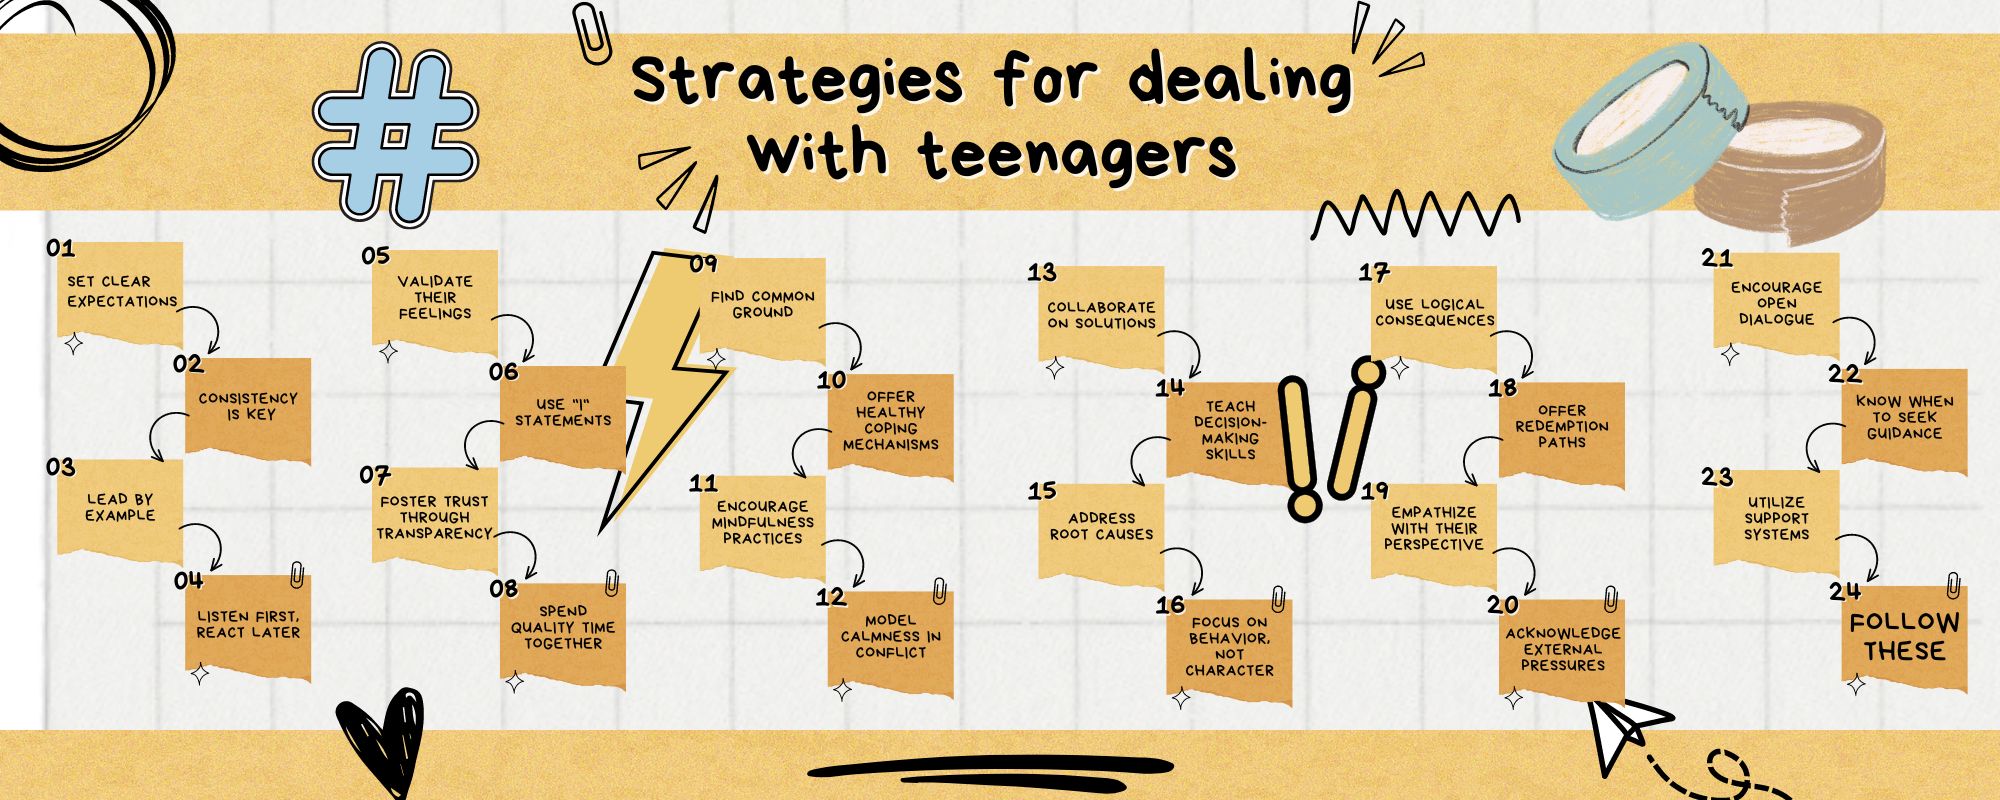 Strategies for dealing with teenagers